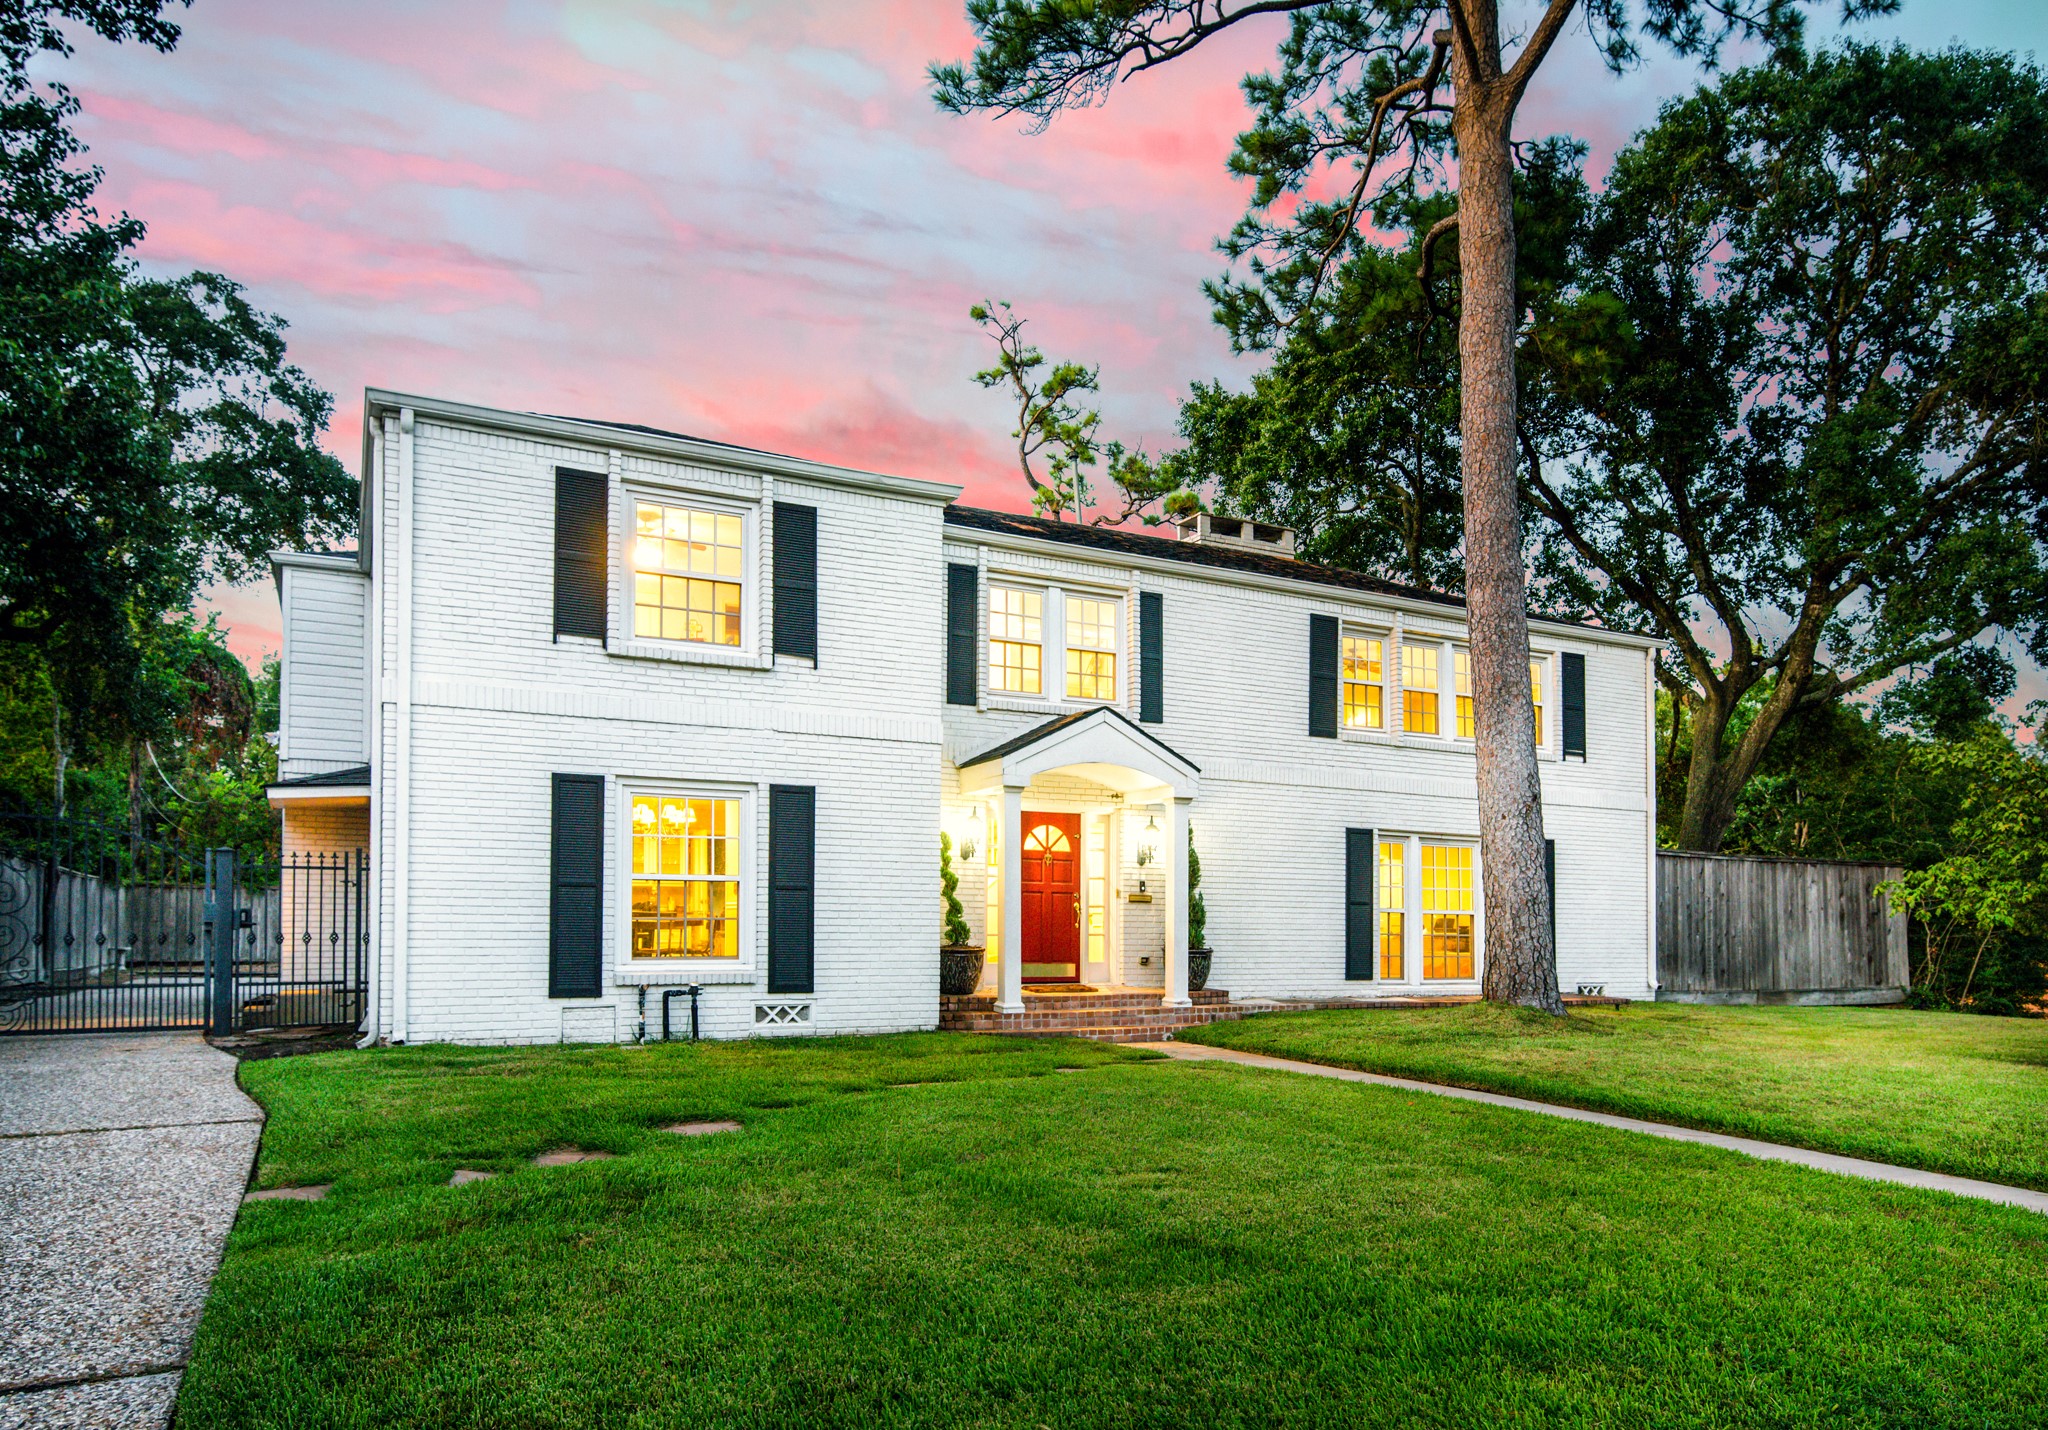 This exceptional River Oaks residence in located in the highly desirable St. John's quadrant of the neighborhood. The lot size is just under 14,000 SF per HCAD. Steps to to Houston's historic River Oaks Boulevard lined with roses on the esplanade.